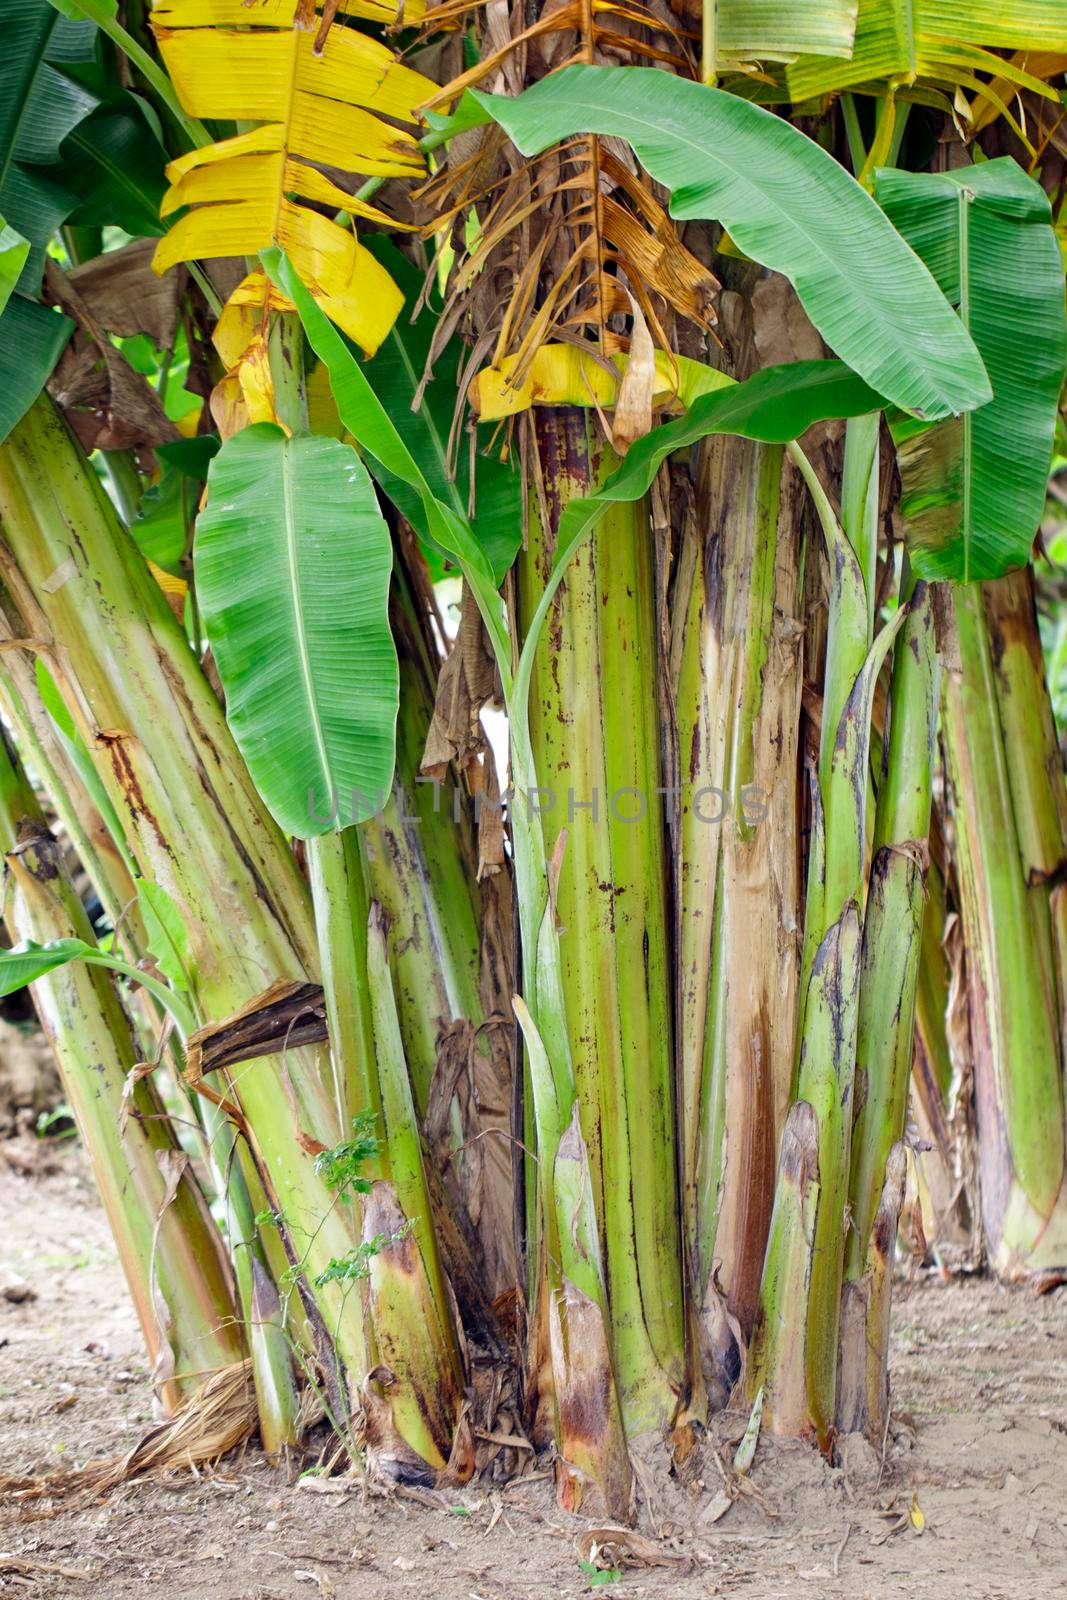 Group of a banana tree in garden in thailand. 